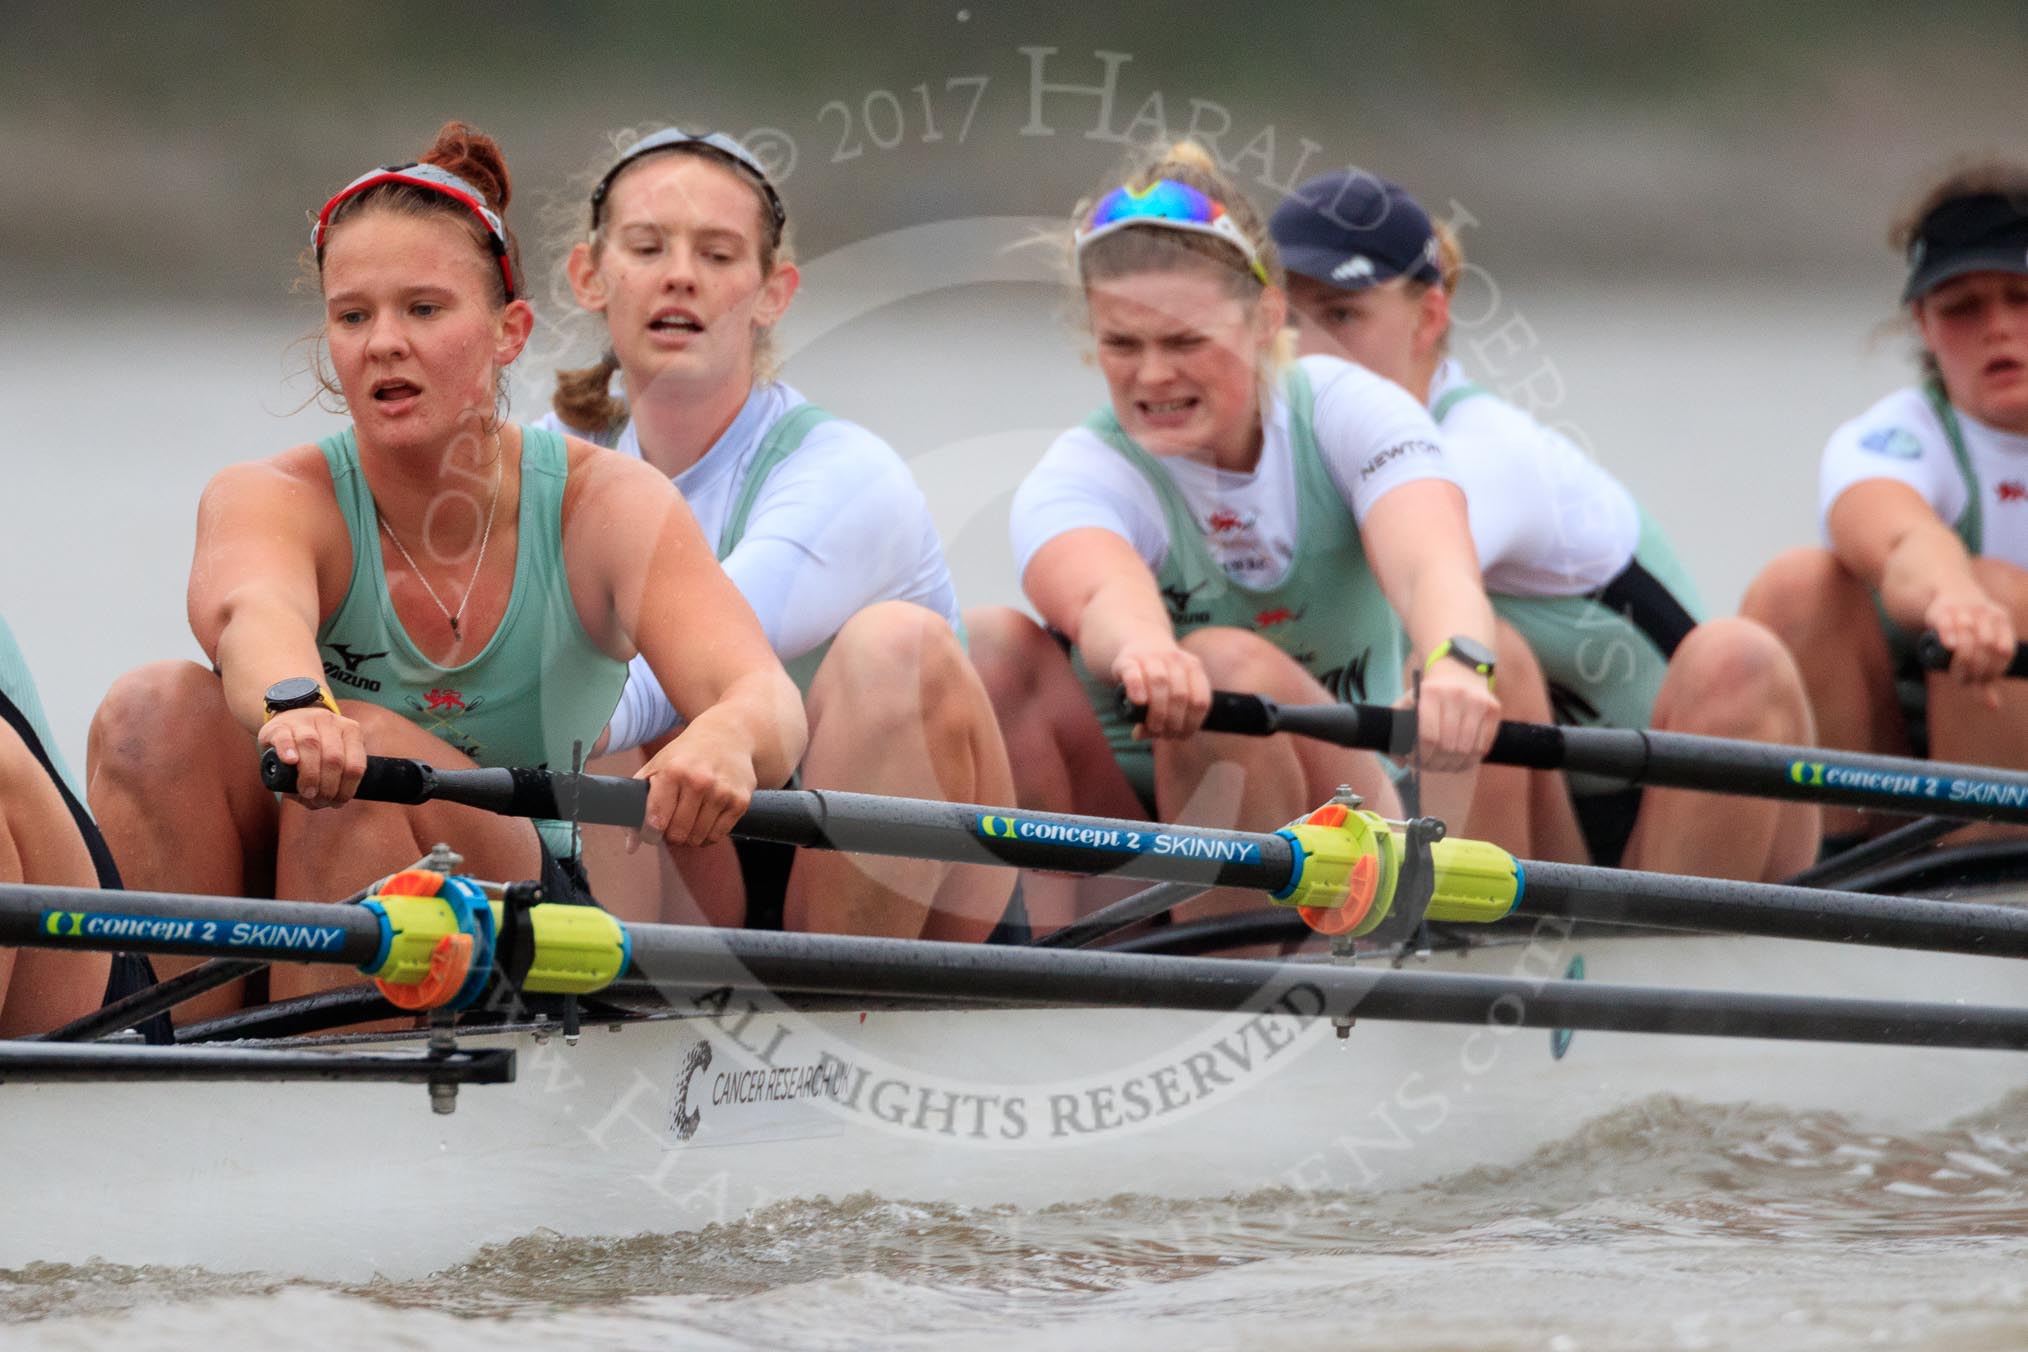 The Boat Race season 2018 - Women's Boat Race Trial Eights (CUWBC, Cambridge): Expecto Patronum, here 5-Kelsey Barolak, 4-Laura Foster, 3-Sally O Brien, 2-Millie Perrin, bow-Eve Caroe.
River Thames between Putney Bridge and Mortlake,
London SW15,

United Kingdom,
on 05 December 2017 at 12:53, image #129